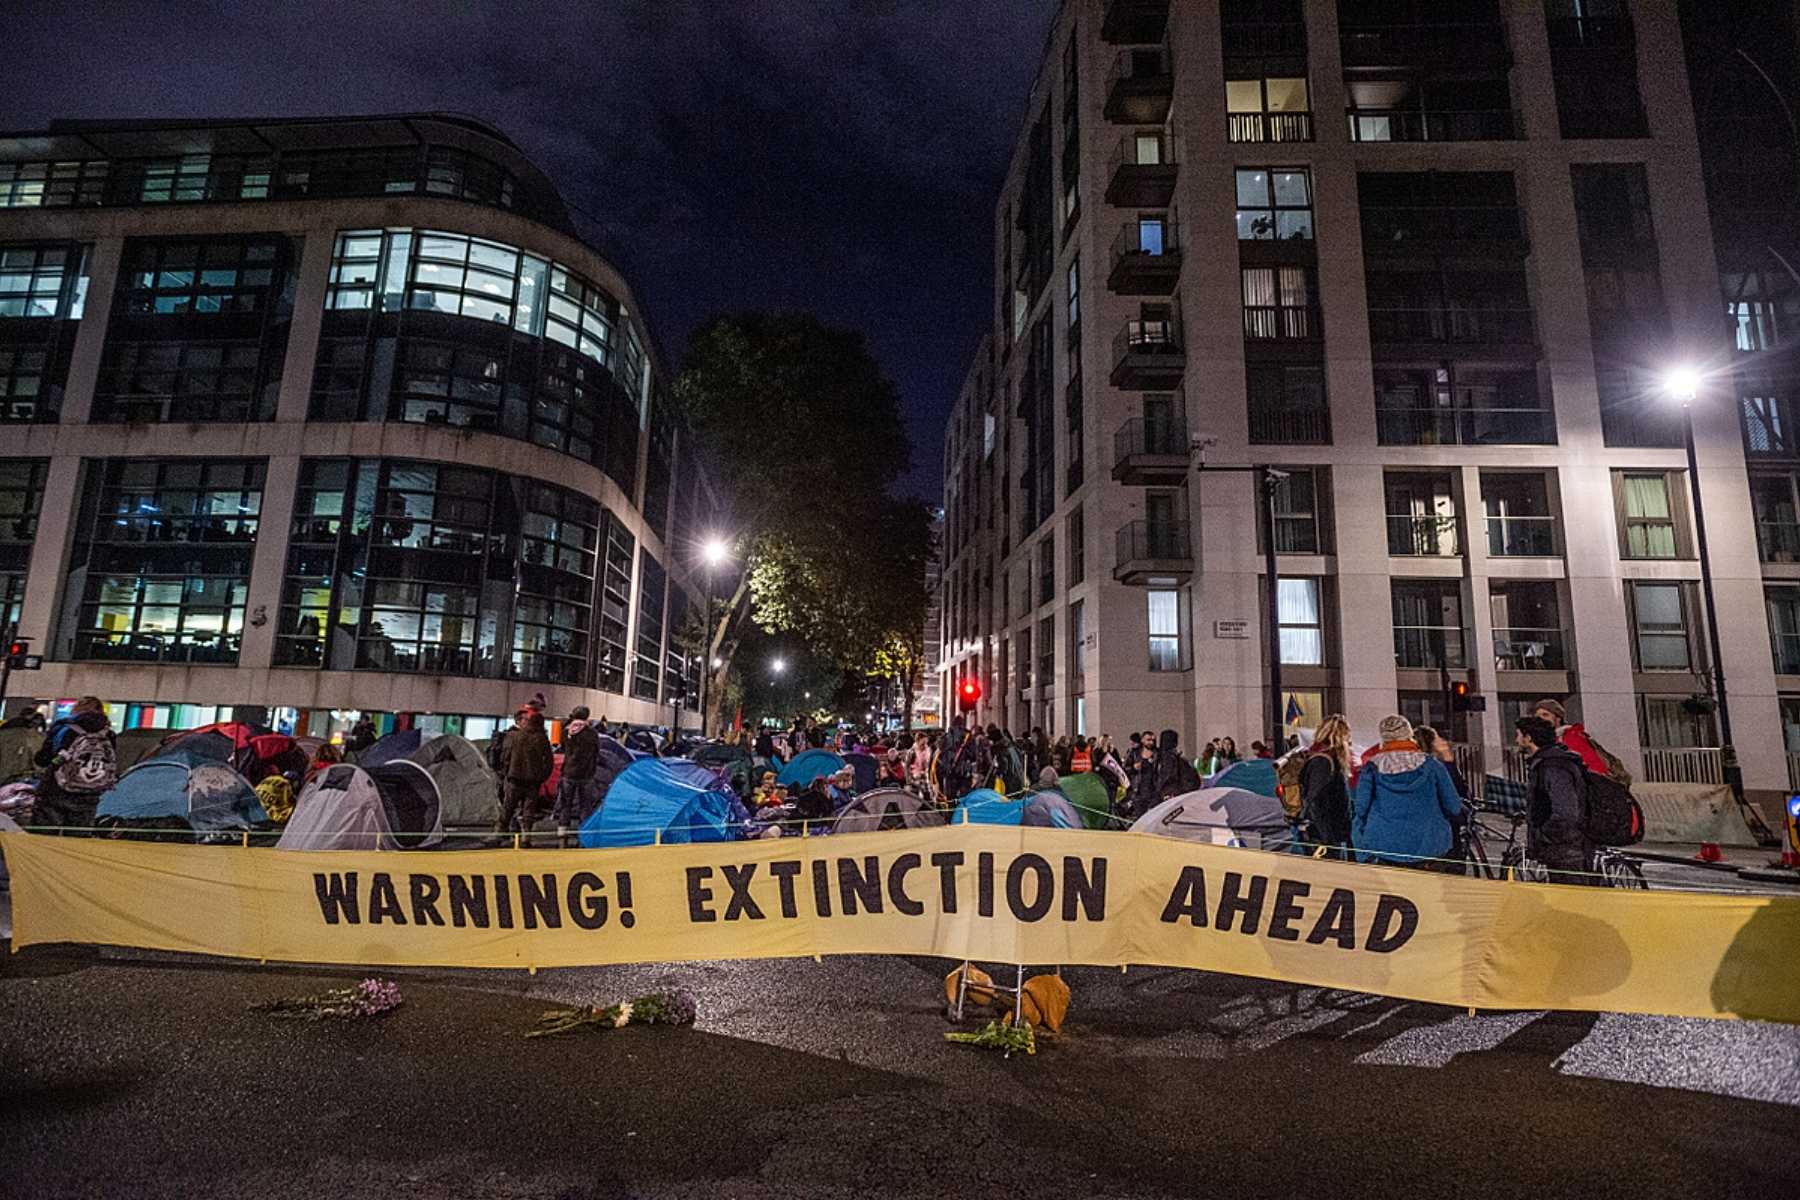 One of many Extinction Rebellion camp sites across the downtown London core.